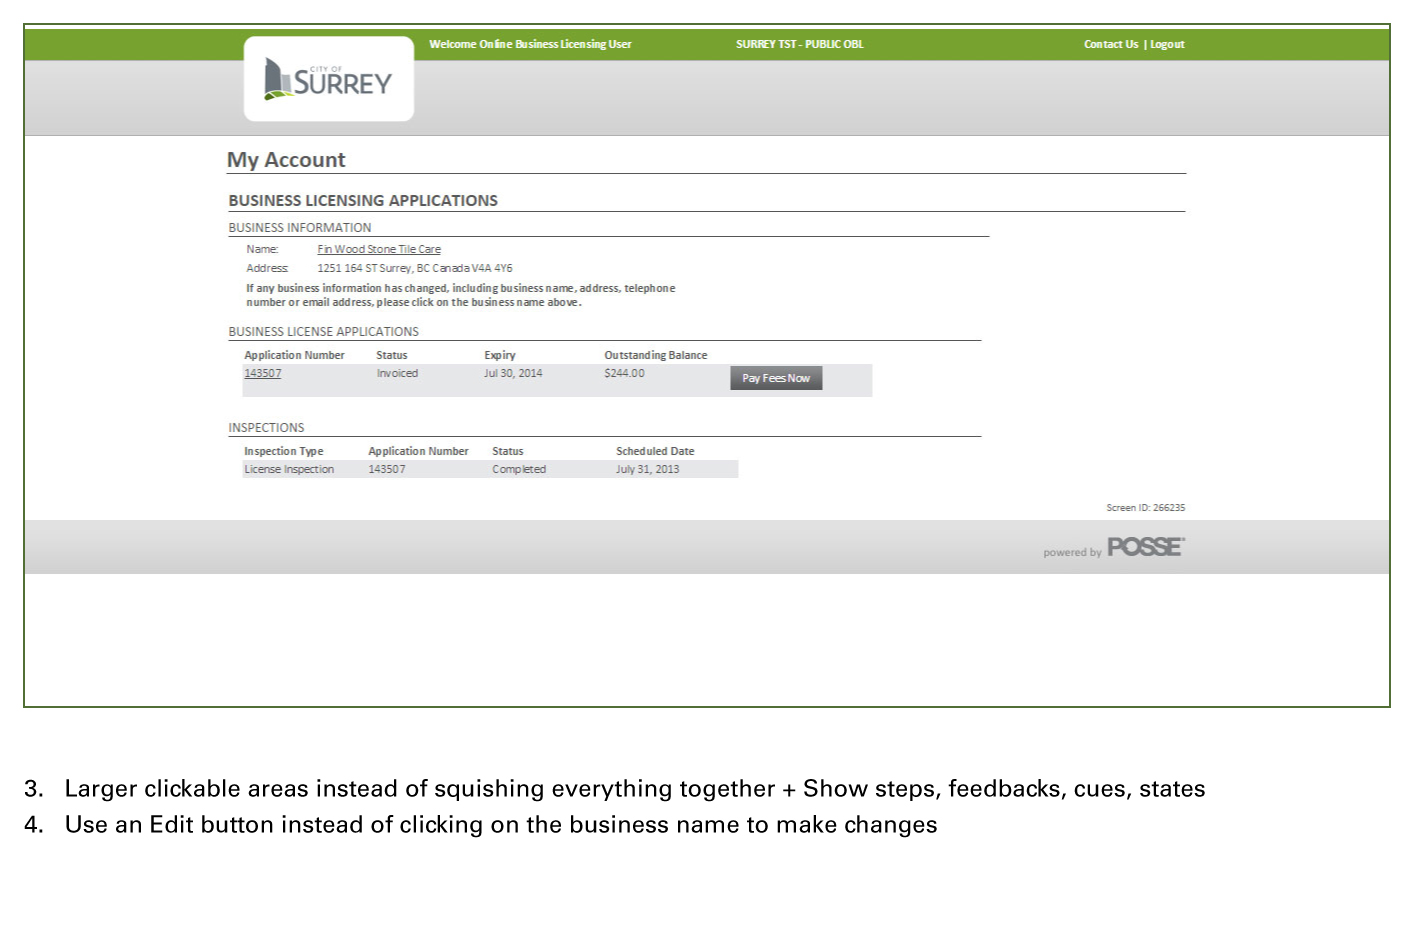 old business licence online service heuristic evaluation